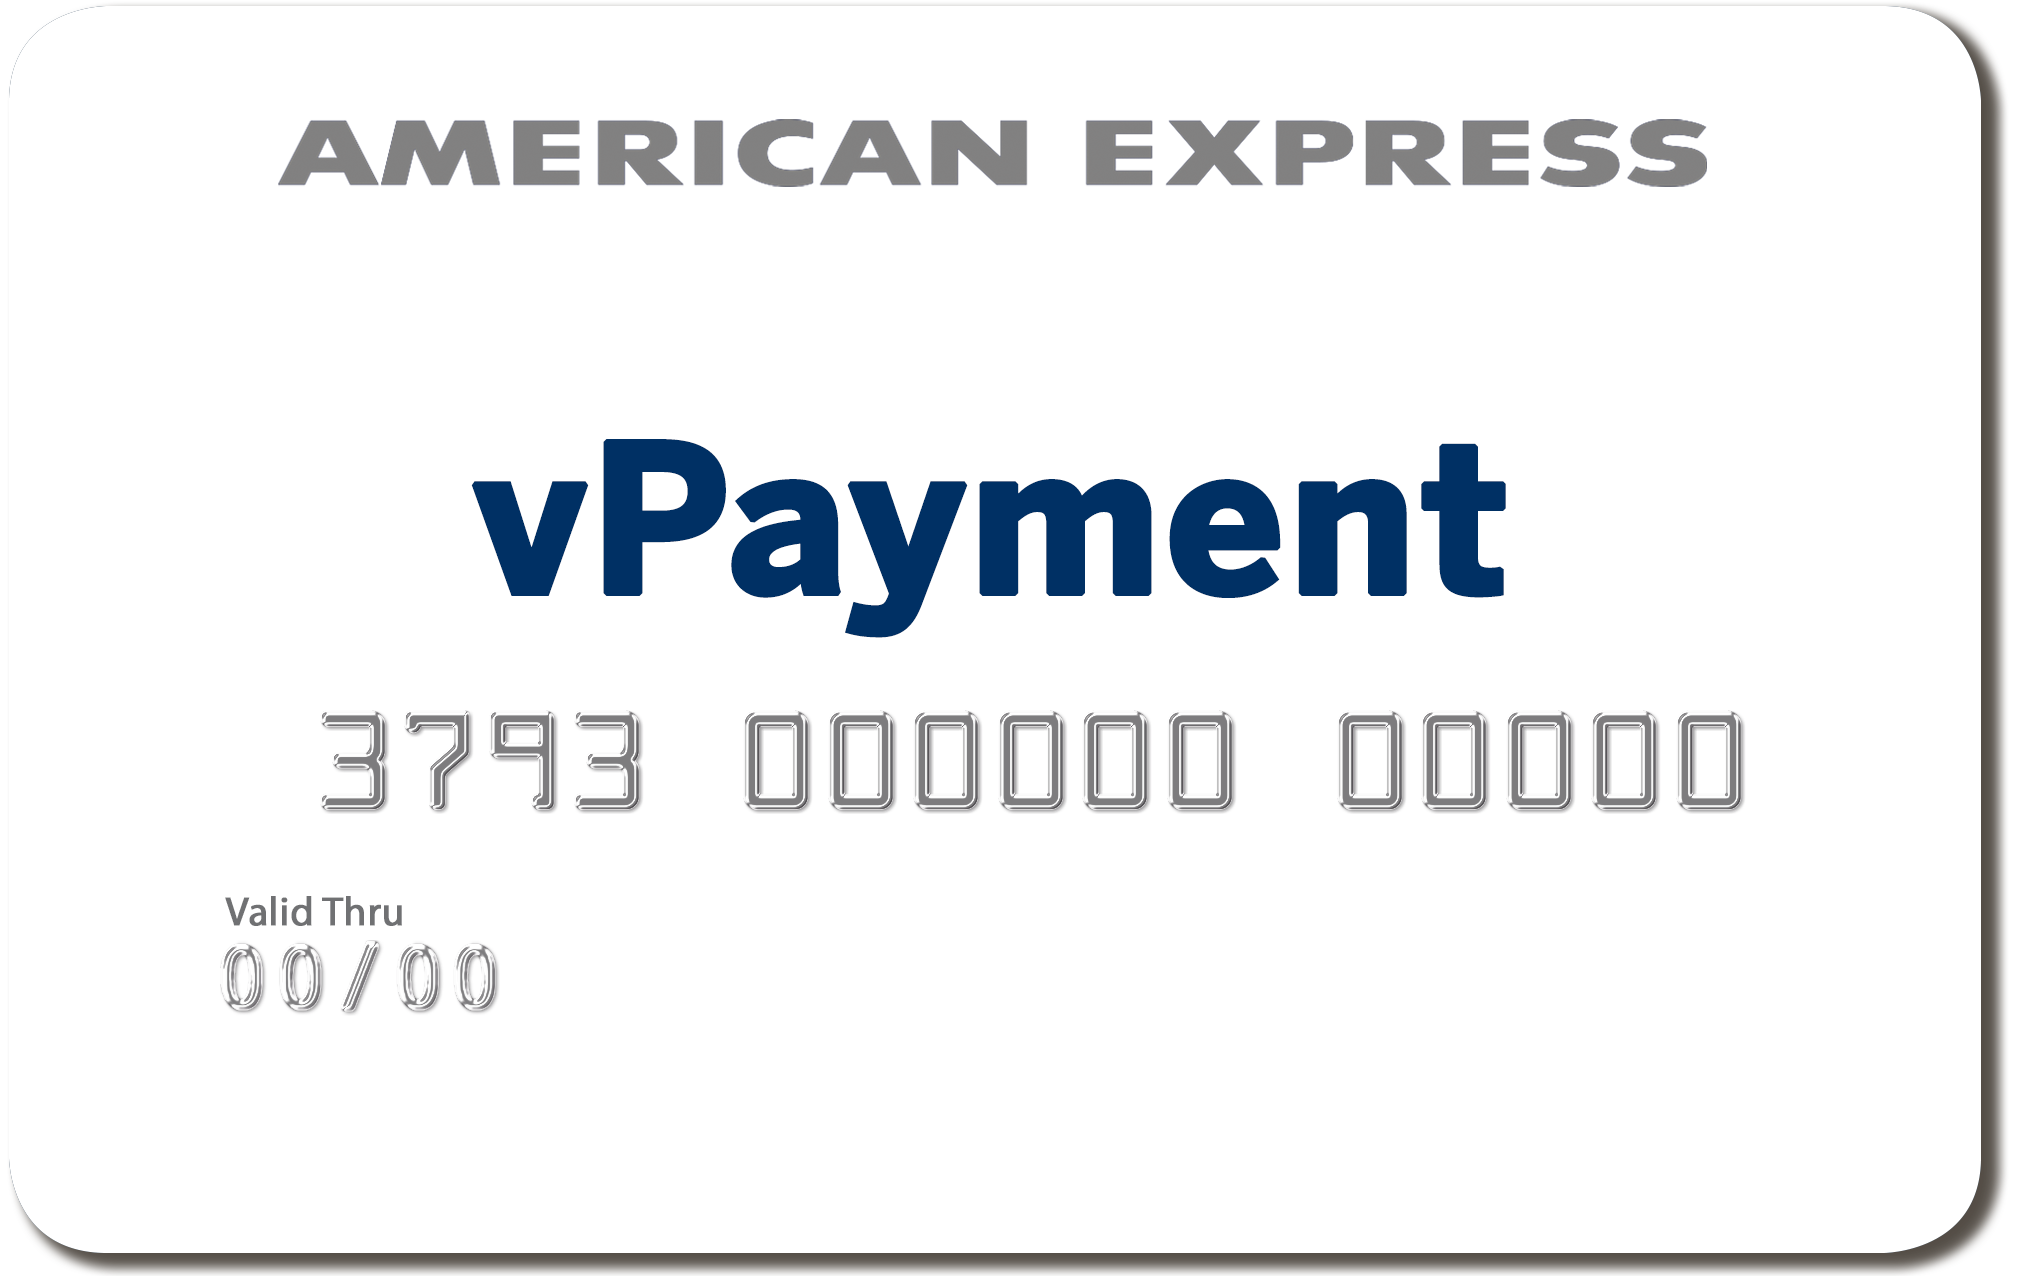 American Express vPayment Account